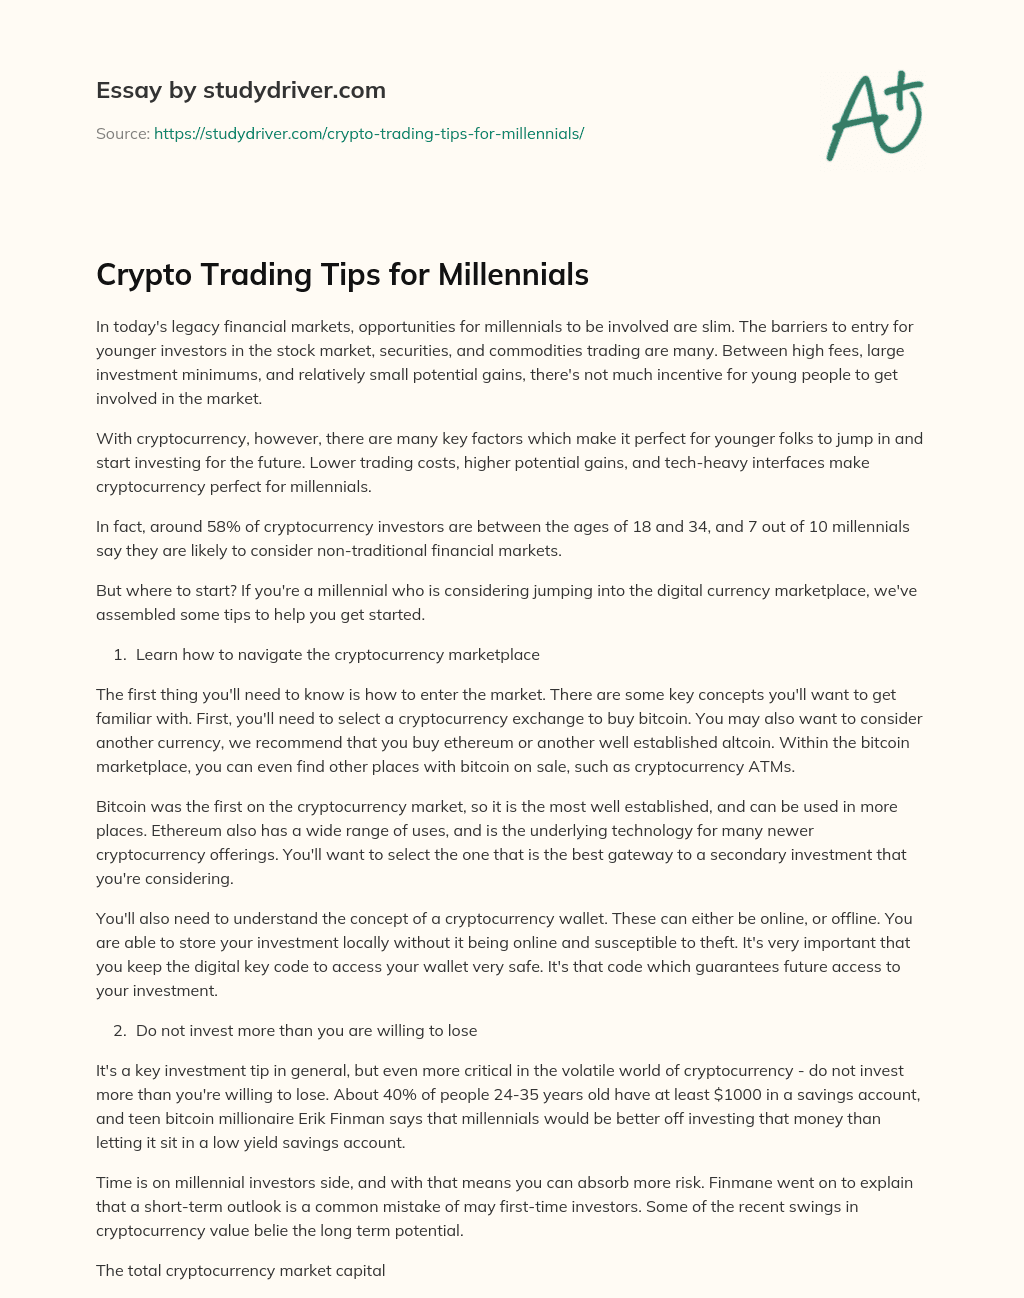 Crypto Trading Tips for Millennials essay